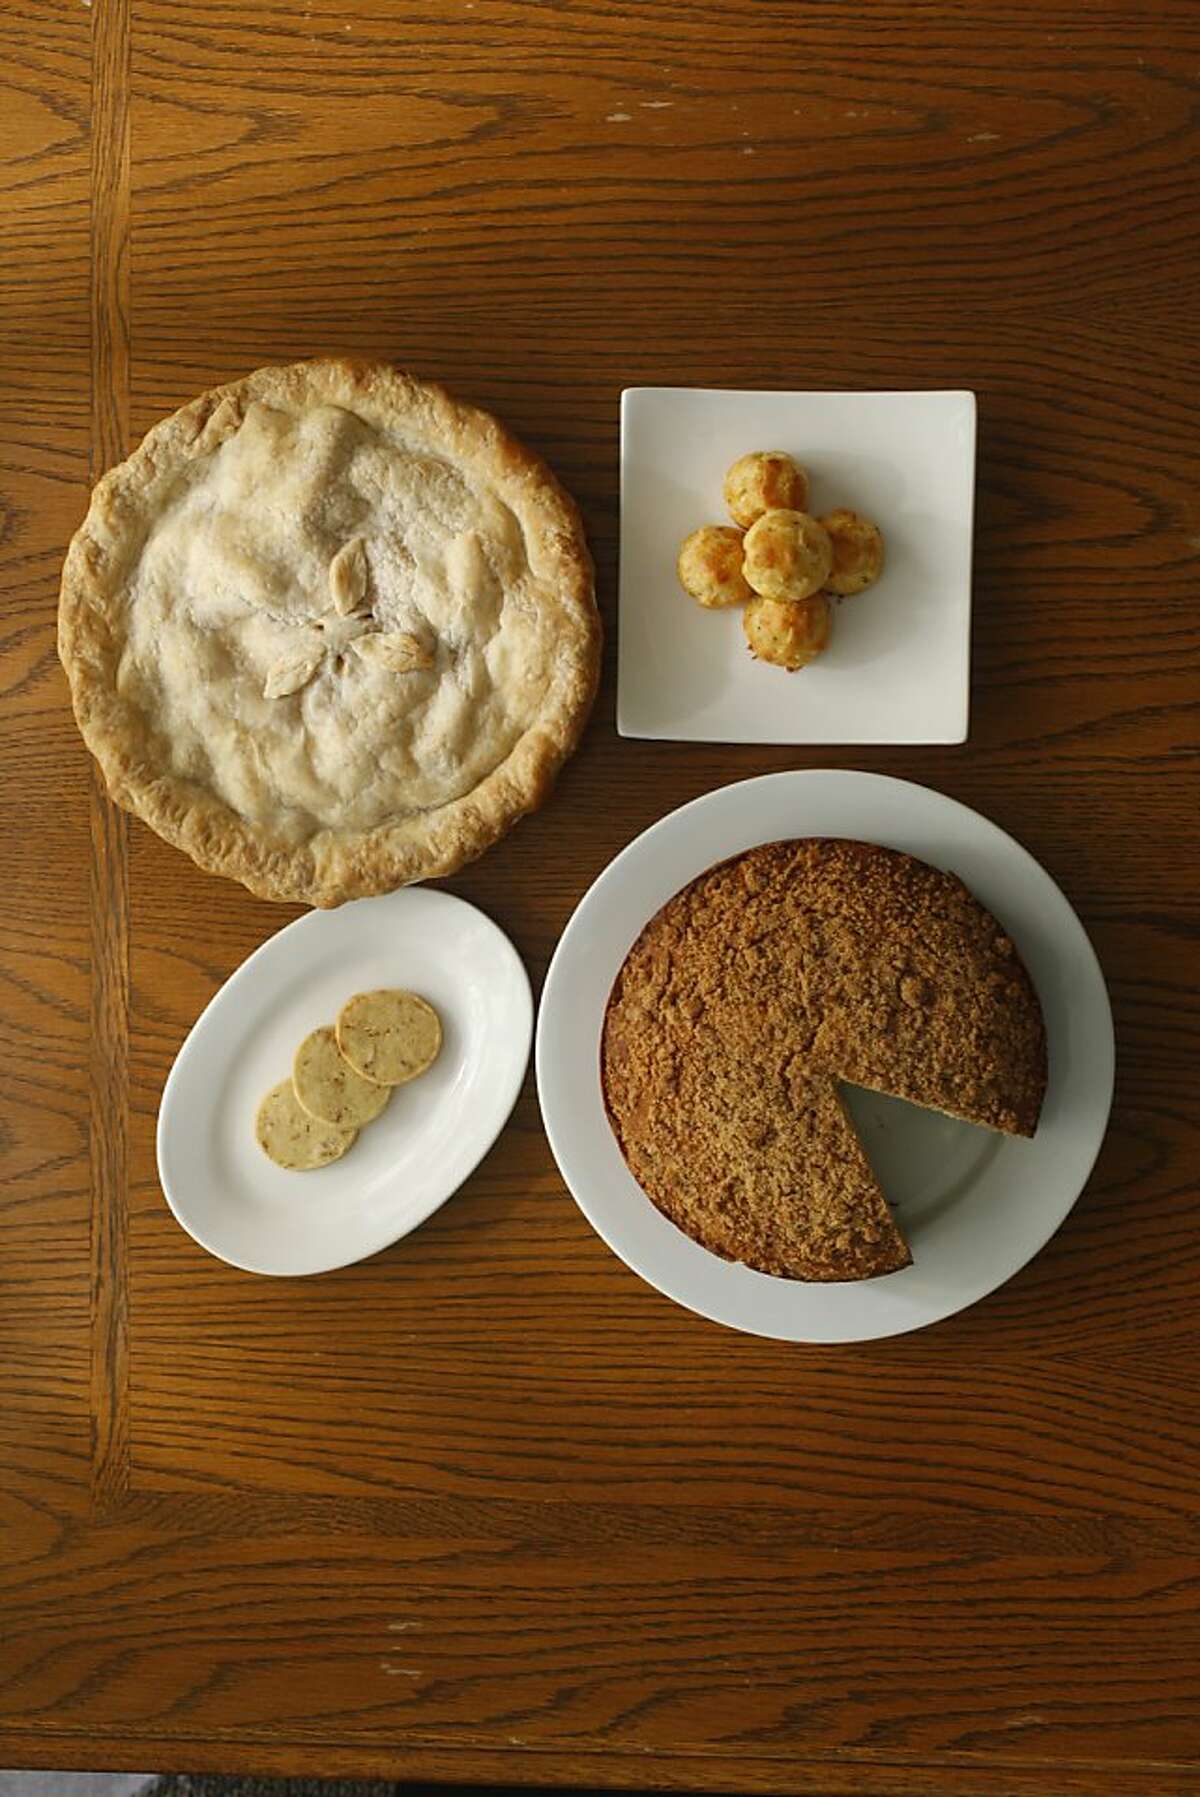 Frozen dough can be used to make-ahead anything from coffee cake to pie.